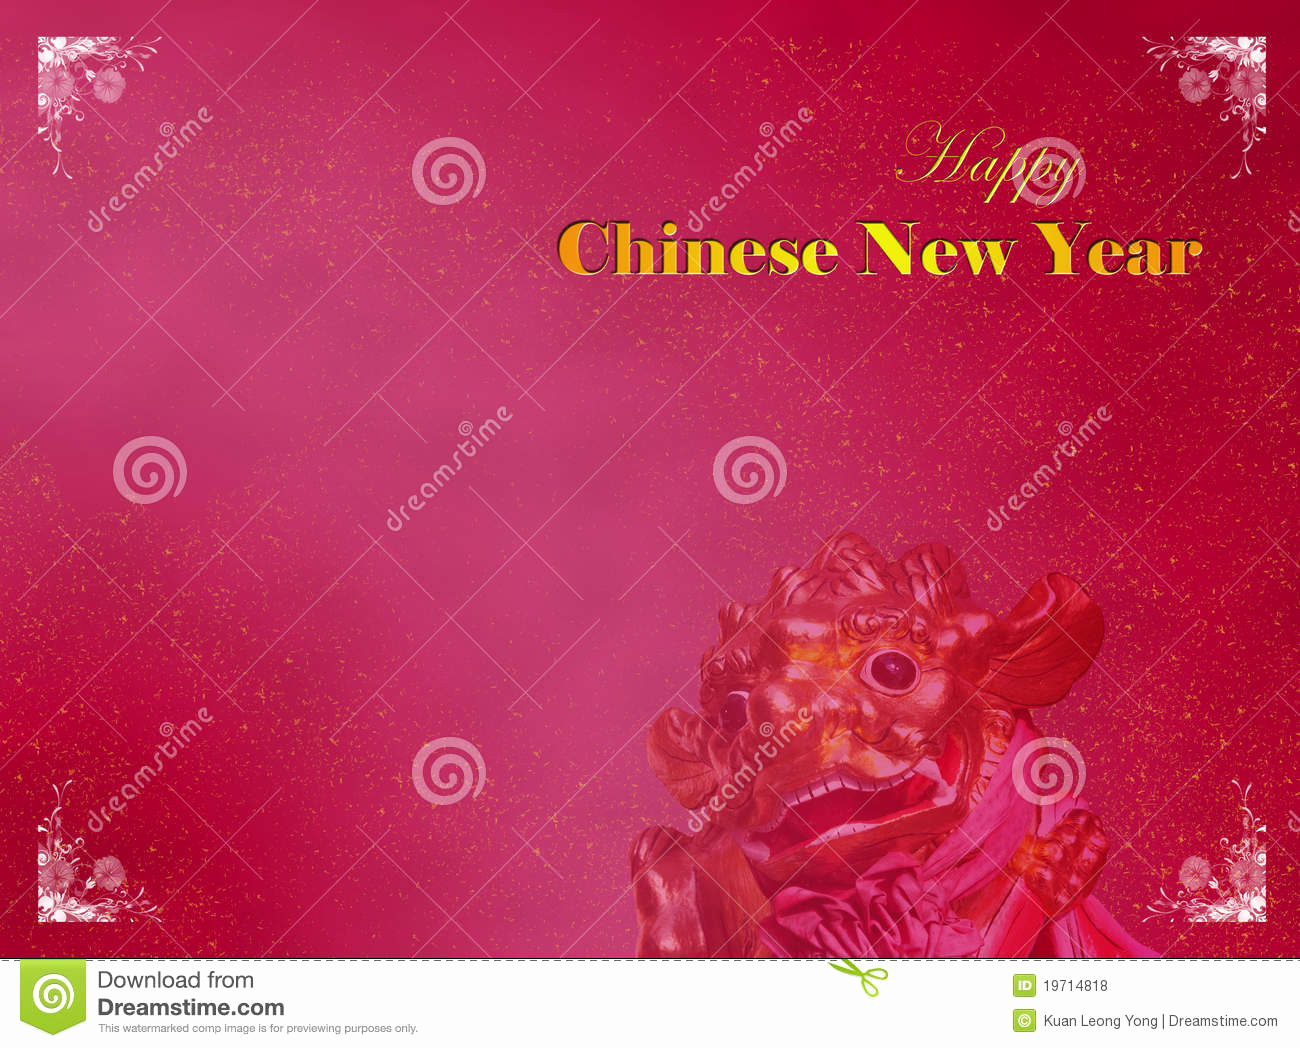 New Year Card Template Beautiful Chinese New Year Card Template Royalty Free Stock S